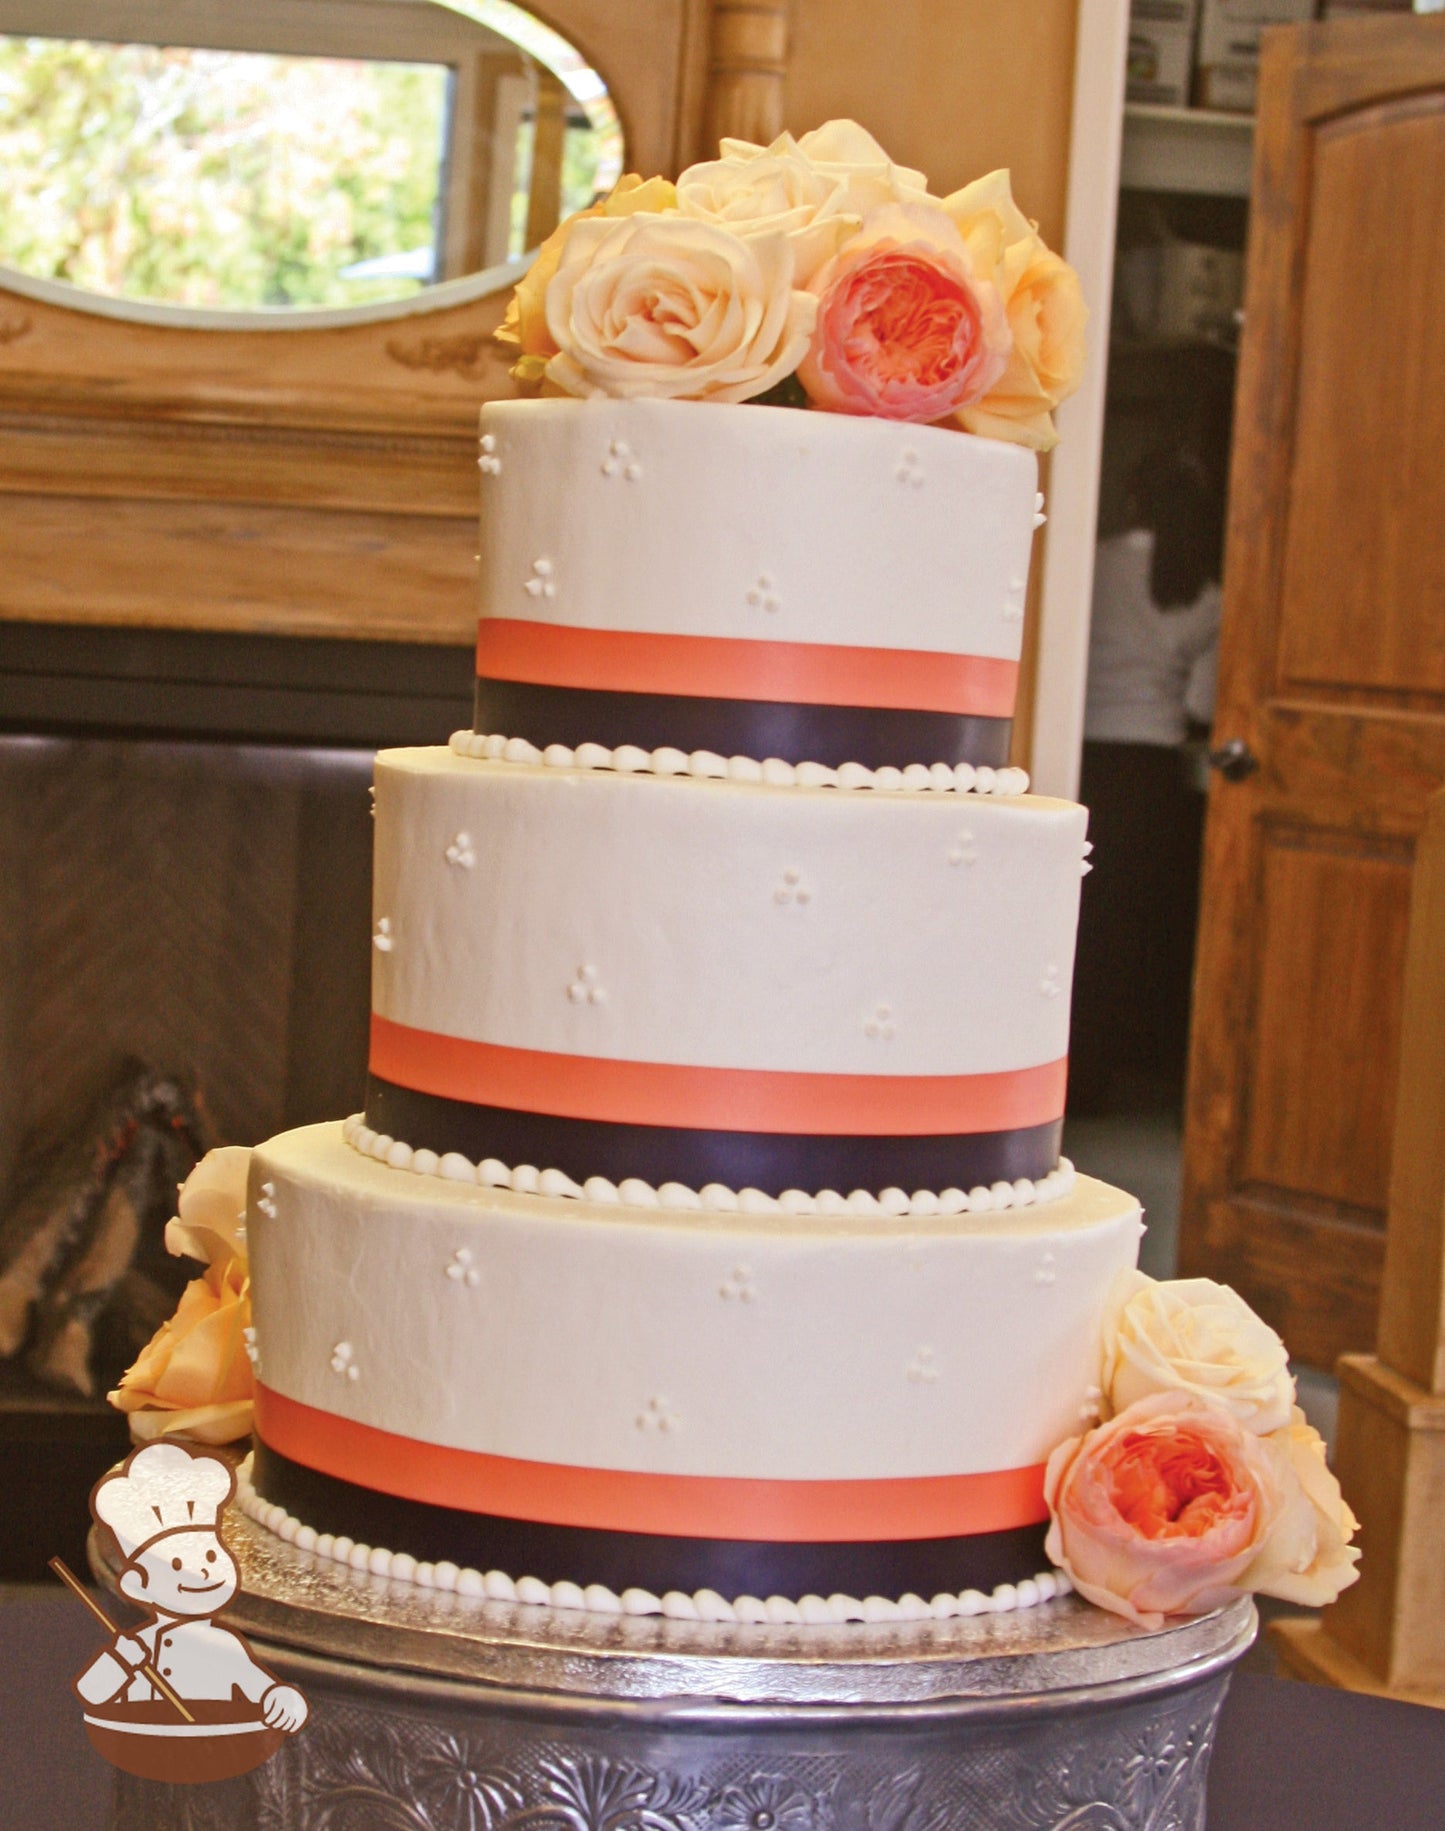 3-tier cake with smooth white icing and decorated with white buttercream tridot piping's and a double layer satin ribbon on base of each tier.